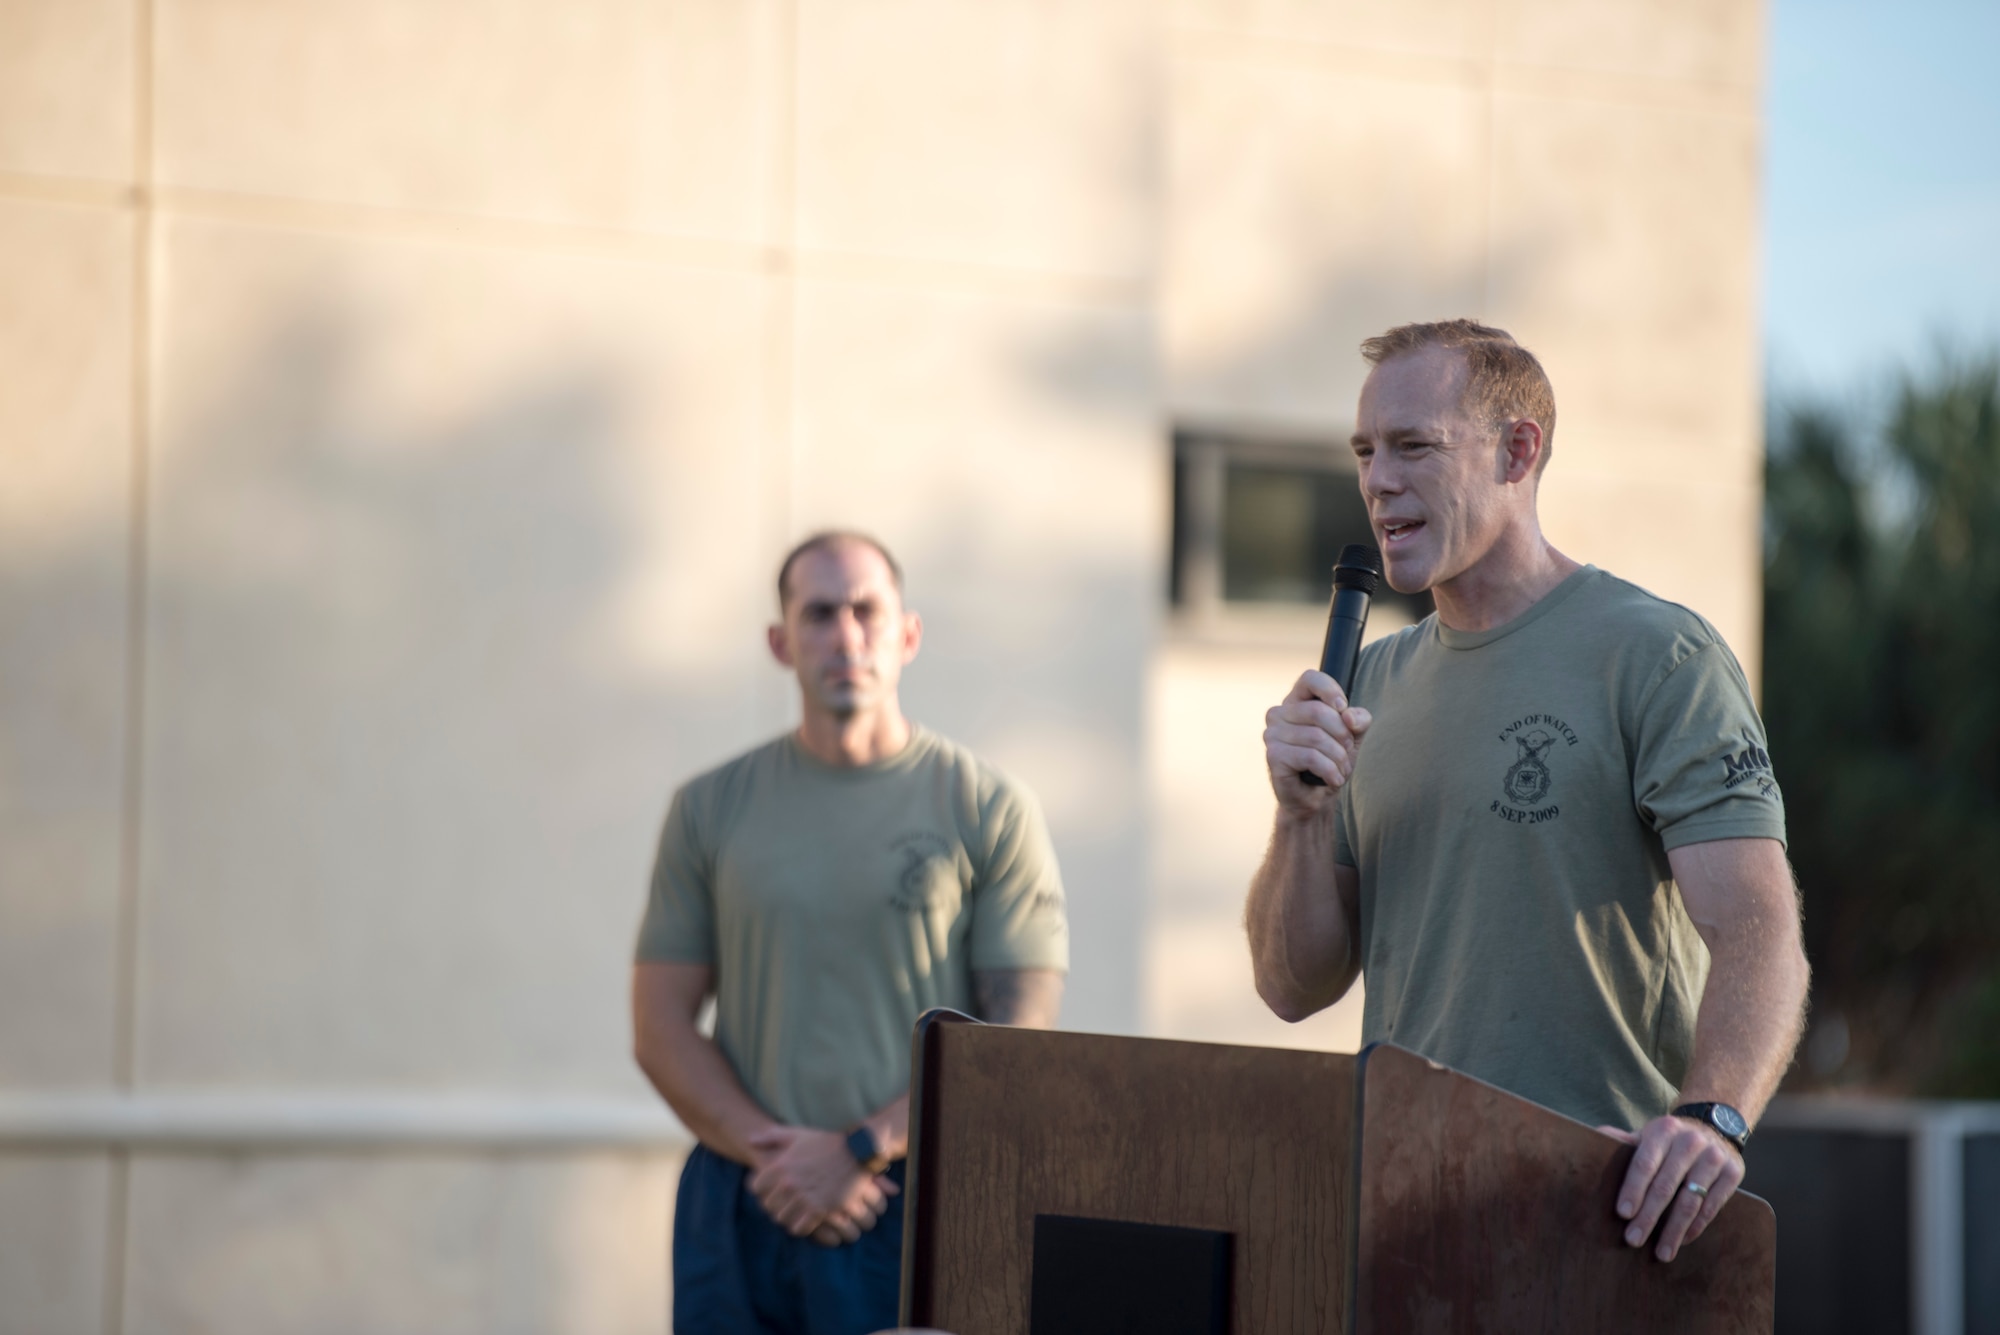 U.S. Air Force Col. Ben Jonsson, the 6th Air Refueling Wing commander, delivers remarks before the Helton Haul 5K run, at MacDill Air Force Base, Fla., Sept. 18, 2020.